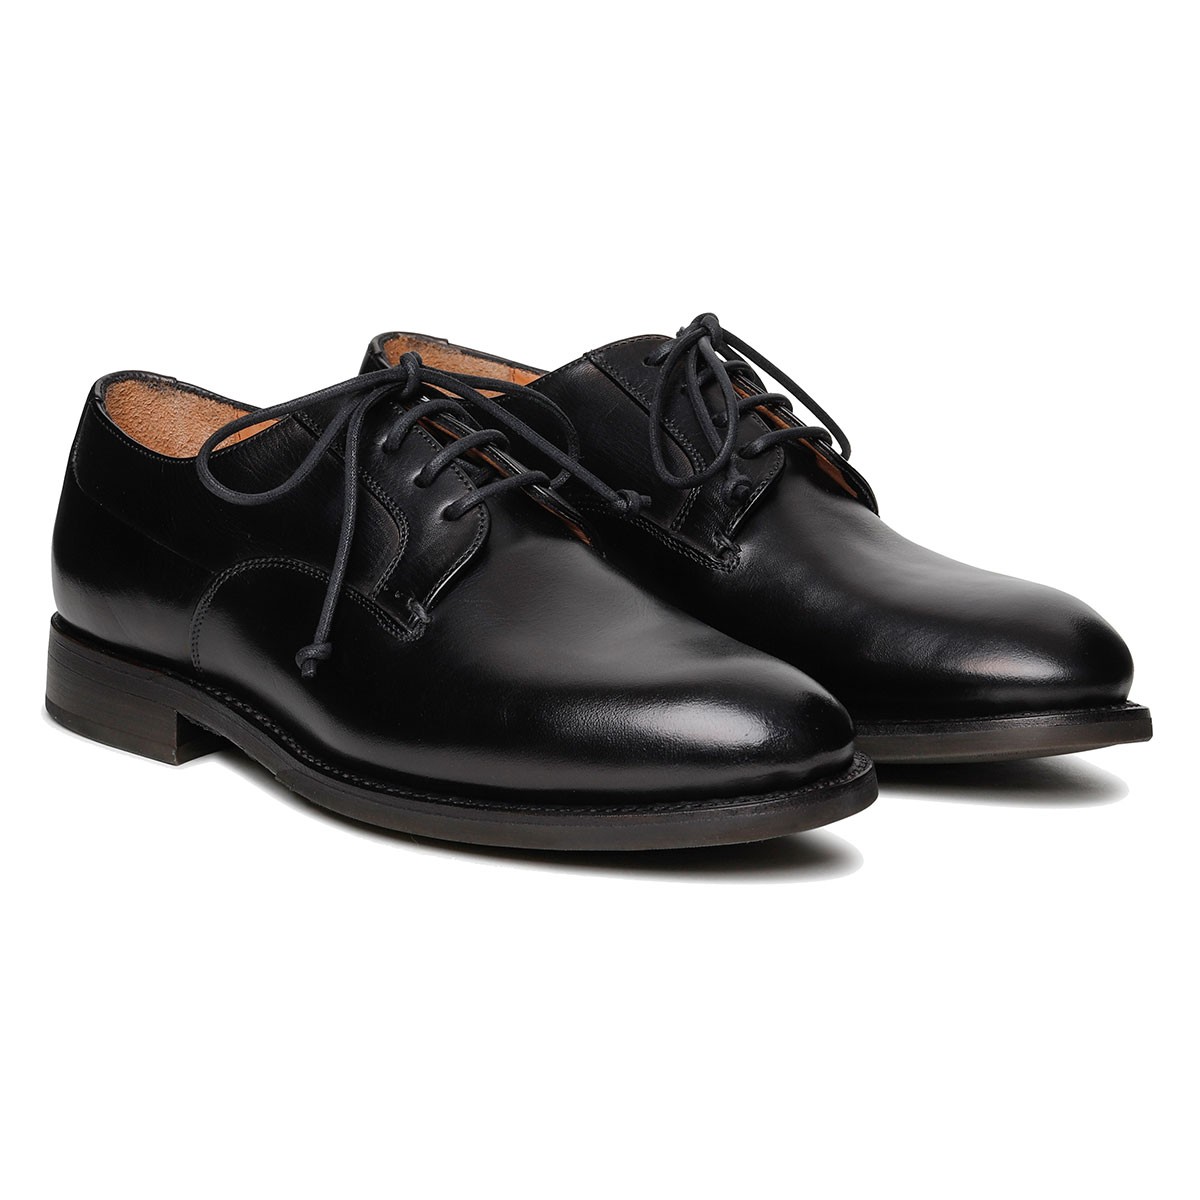 Firenze black leather Derby shoes